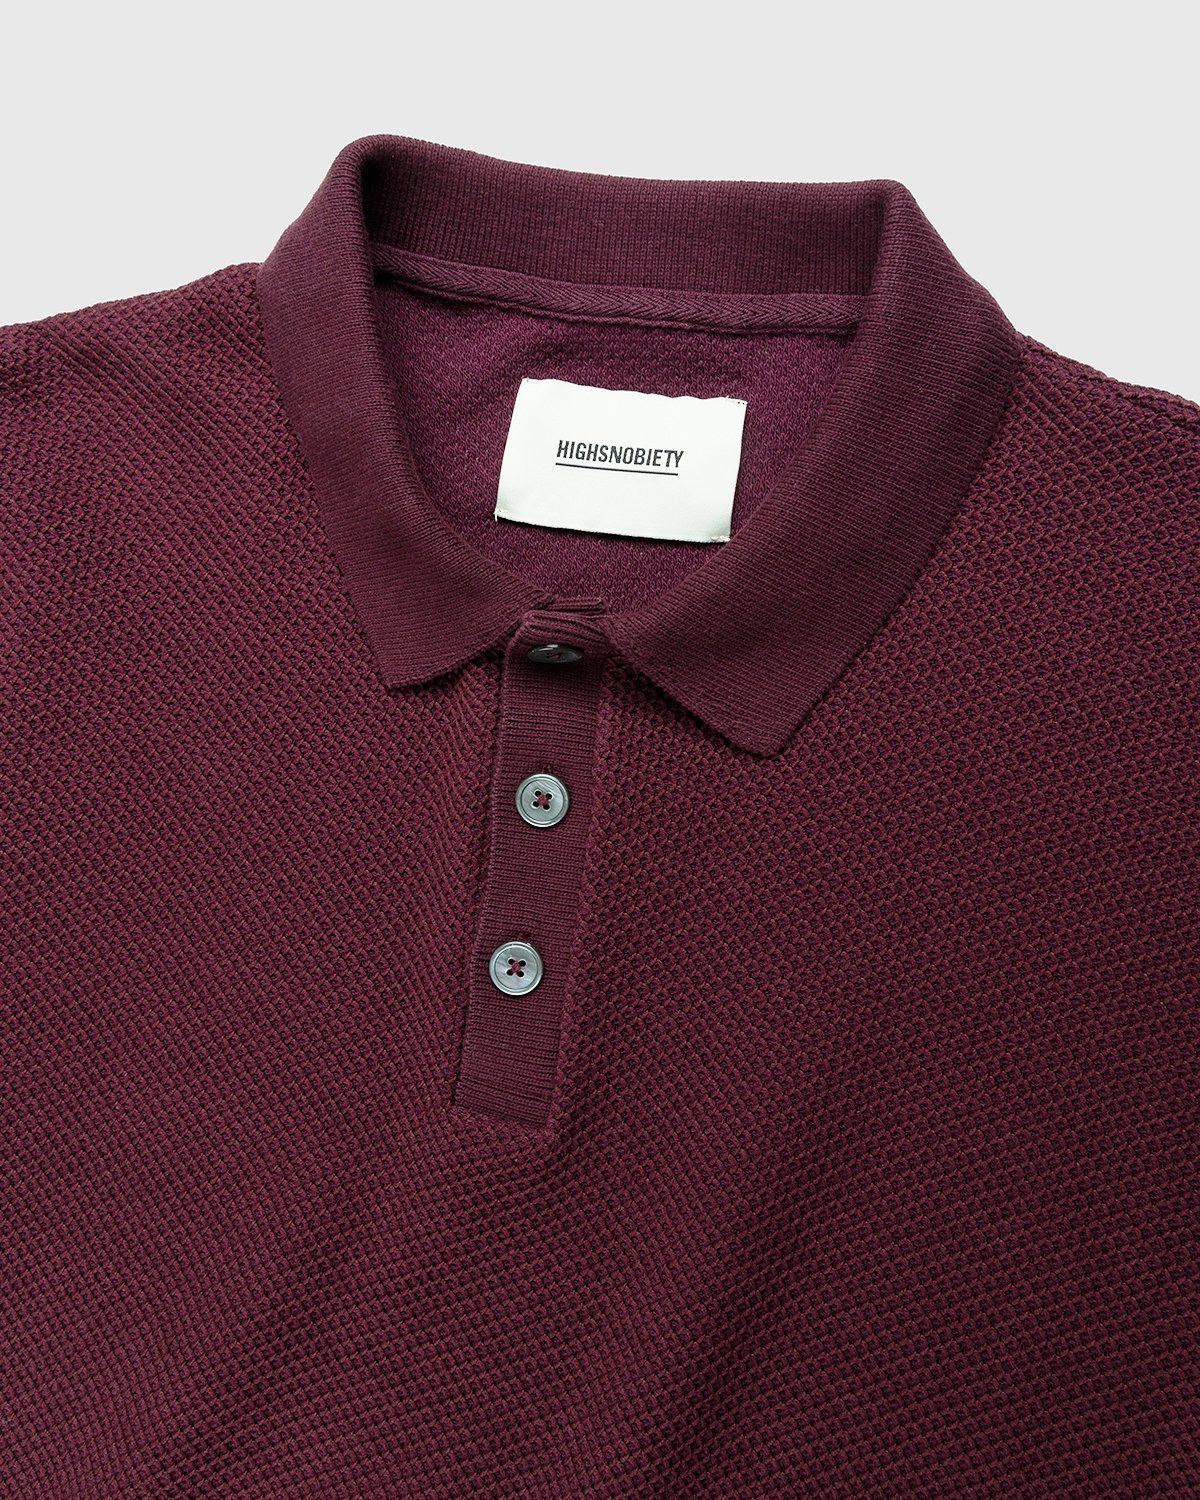 Highsnobiety – Knit Short-Sleeve Polo Bordeaux - Polos - Brown - Image 5